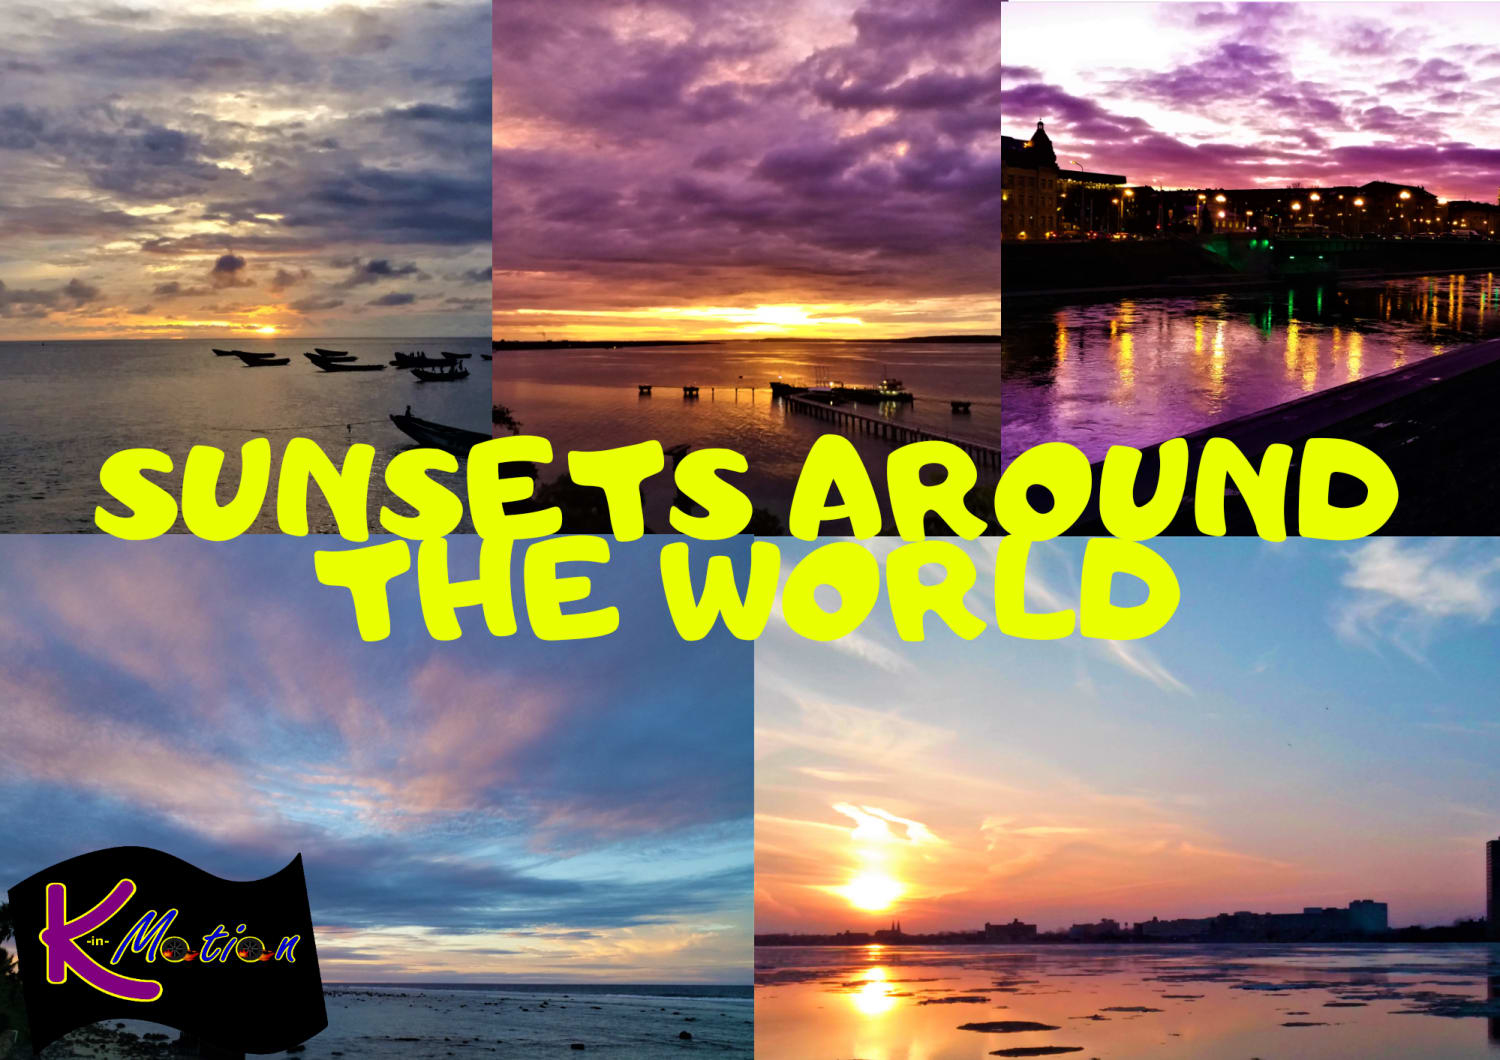 40 Beautiful Sunsets Around the World to Make You Smile